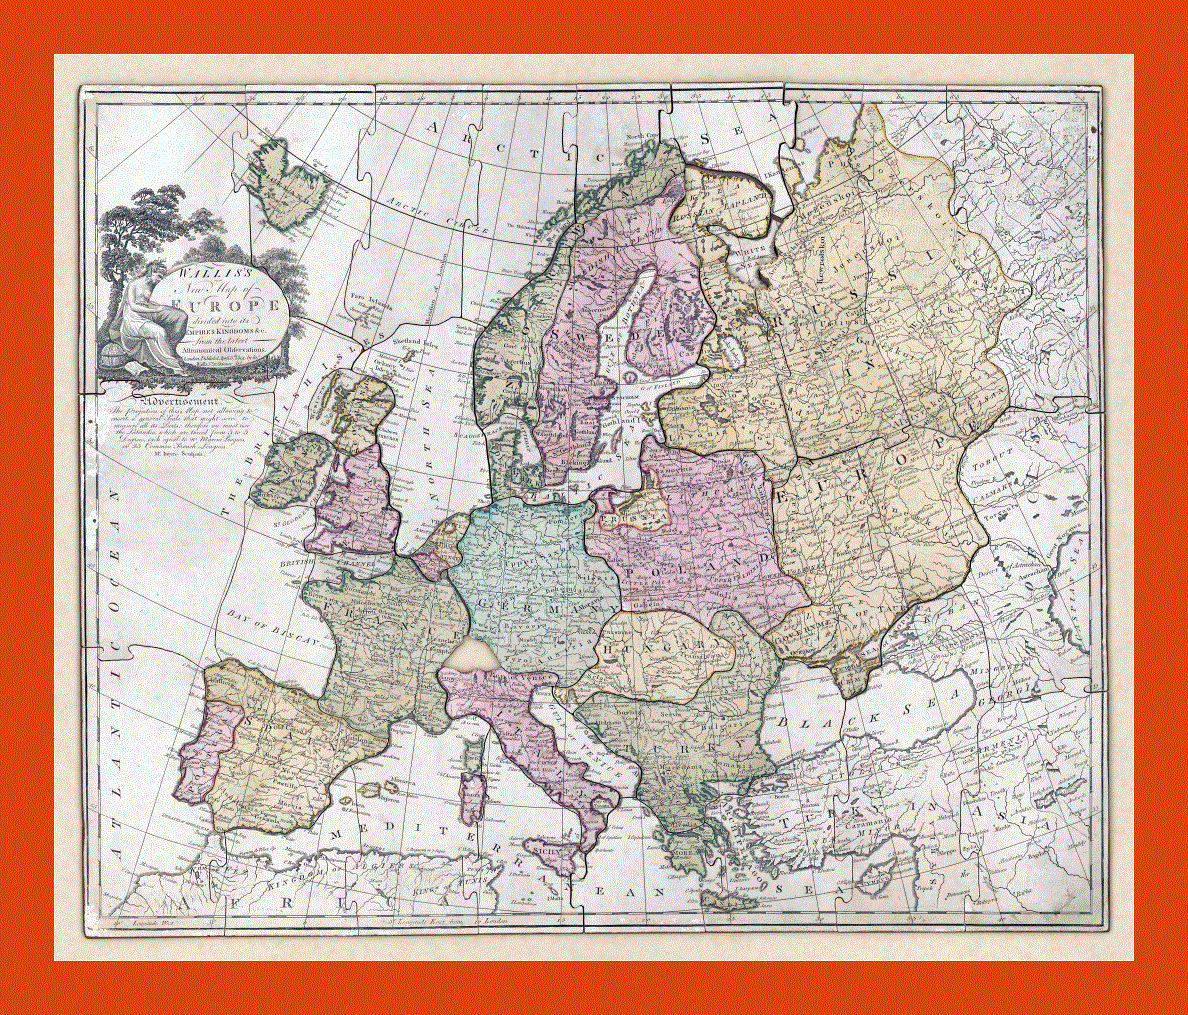 Old political map of Europe - 1814